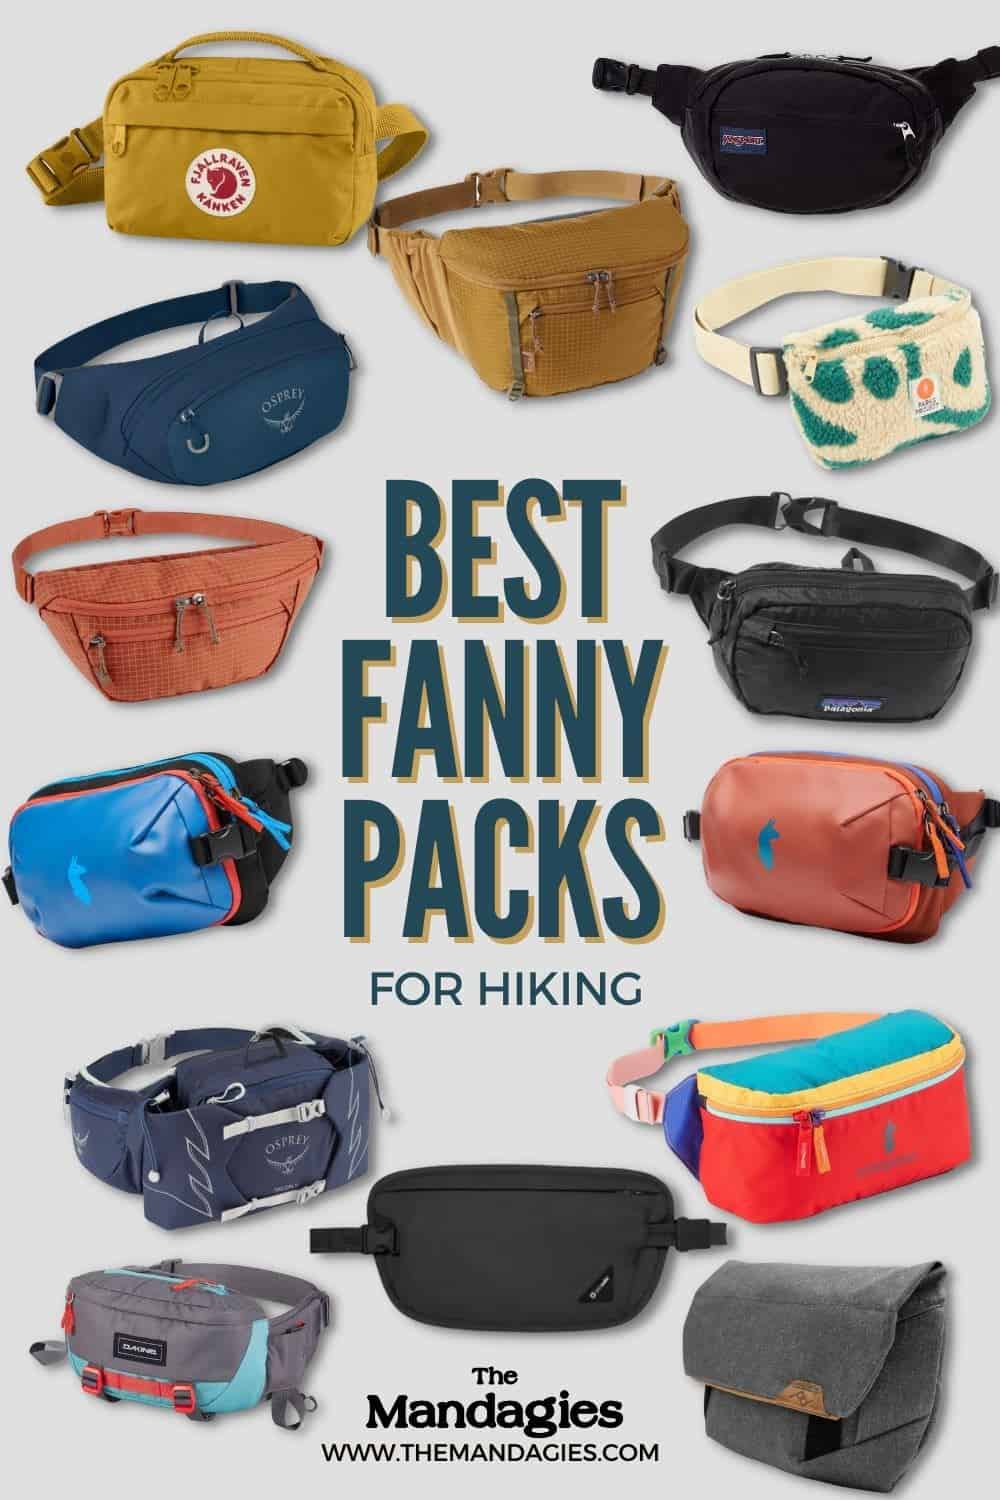 Best Fanny Packs For Hiking and Outdoor Adventure - Pinterest Pin